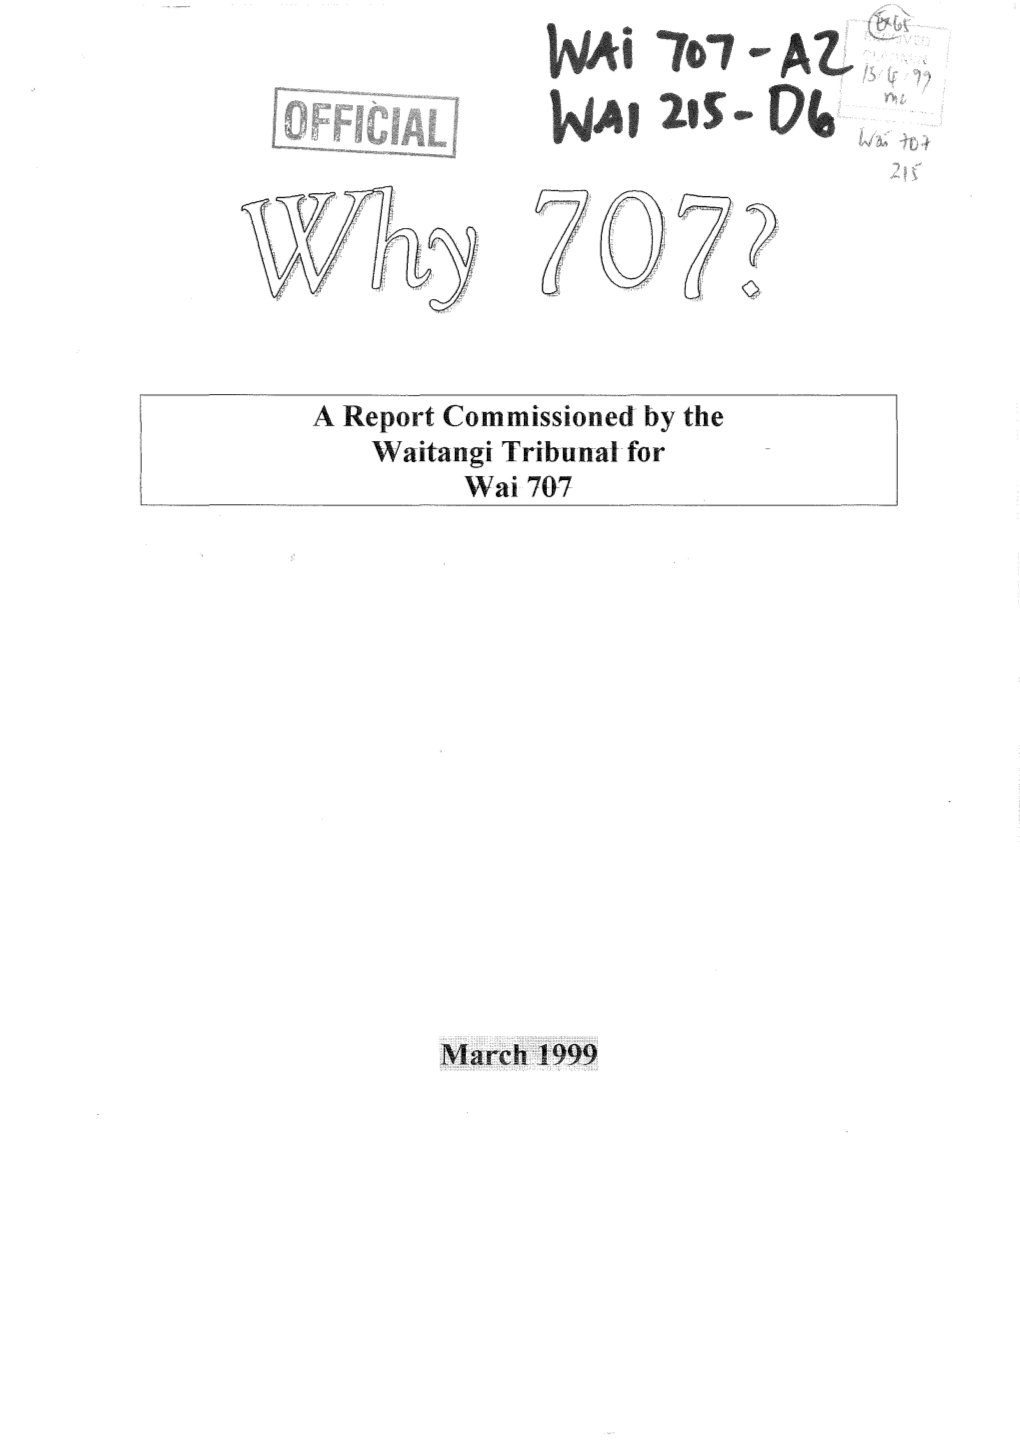 A Report Commissioned by the Waitangi Tribunalfor Wai7o-7